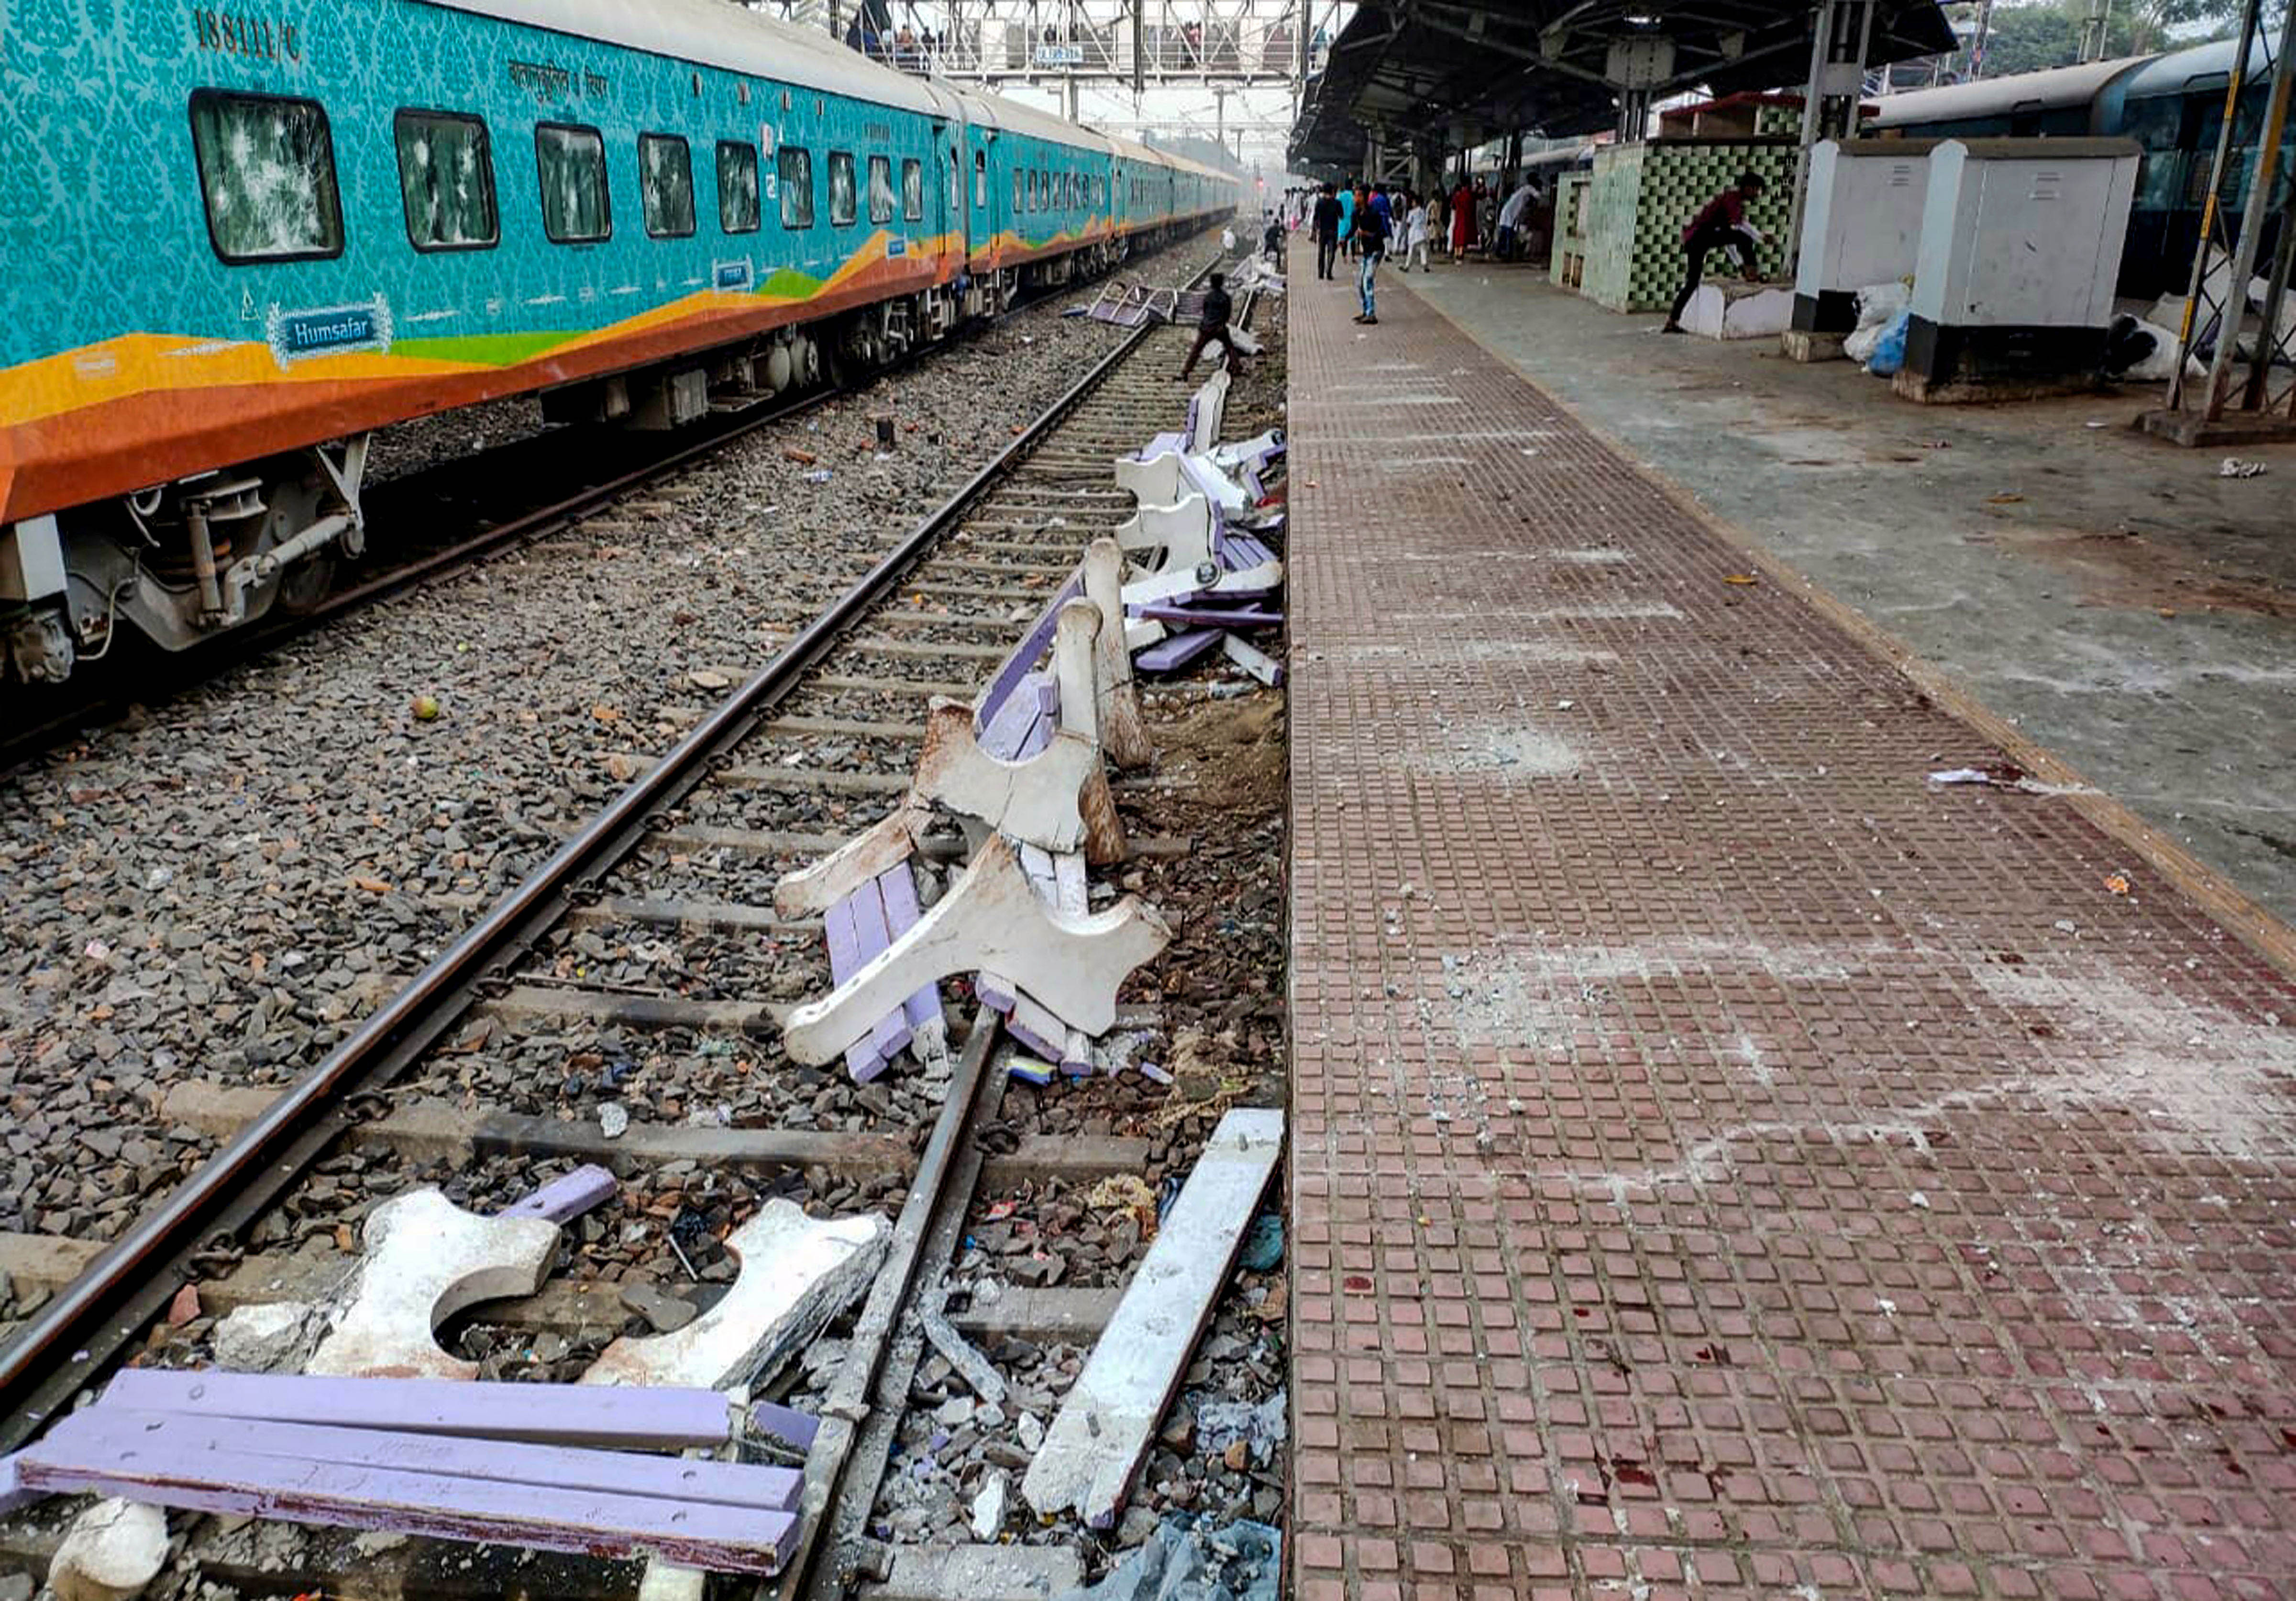 Citizenship Act row: Mamata warns of stern action after rly station set ablaze